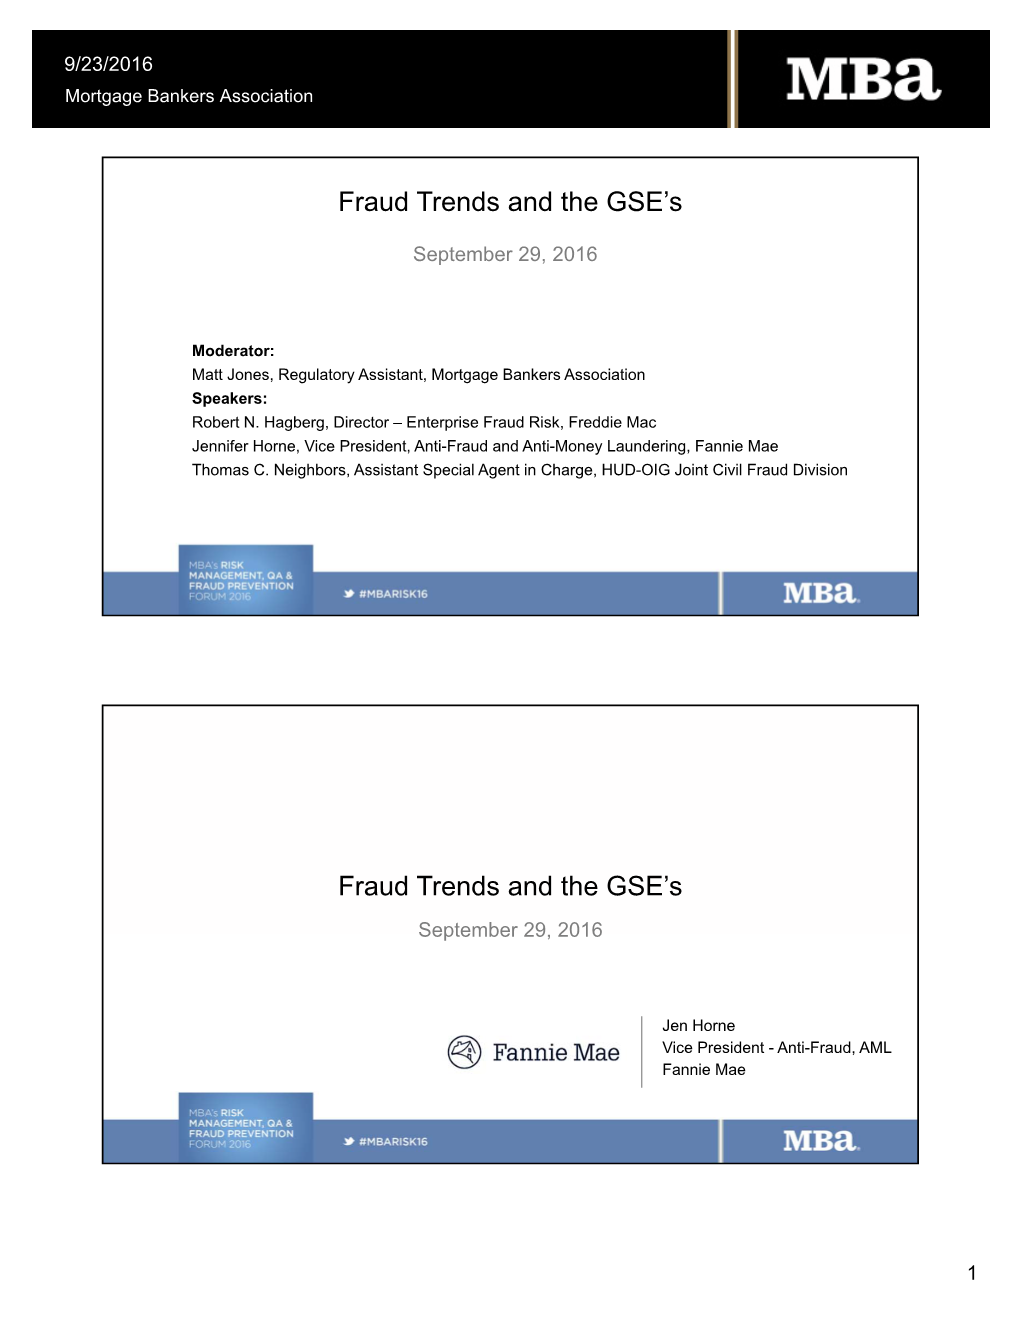 Fraud Trends and the GSE's Fraud